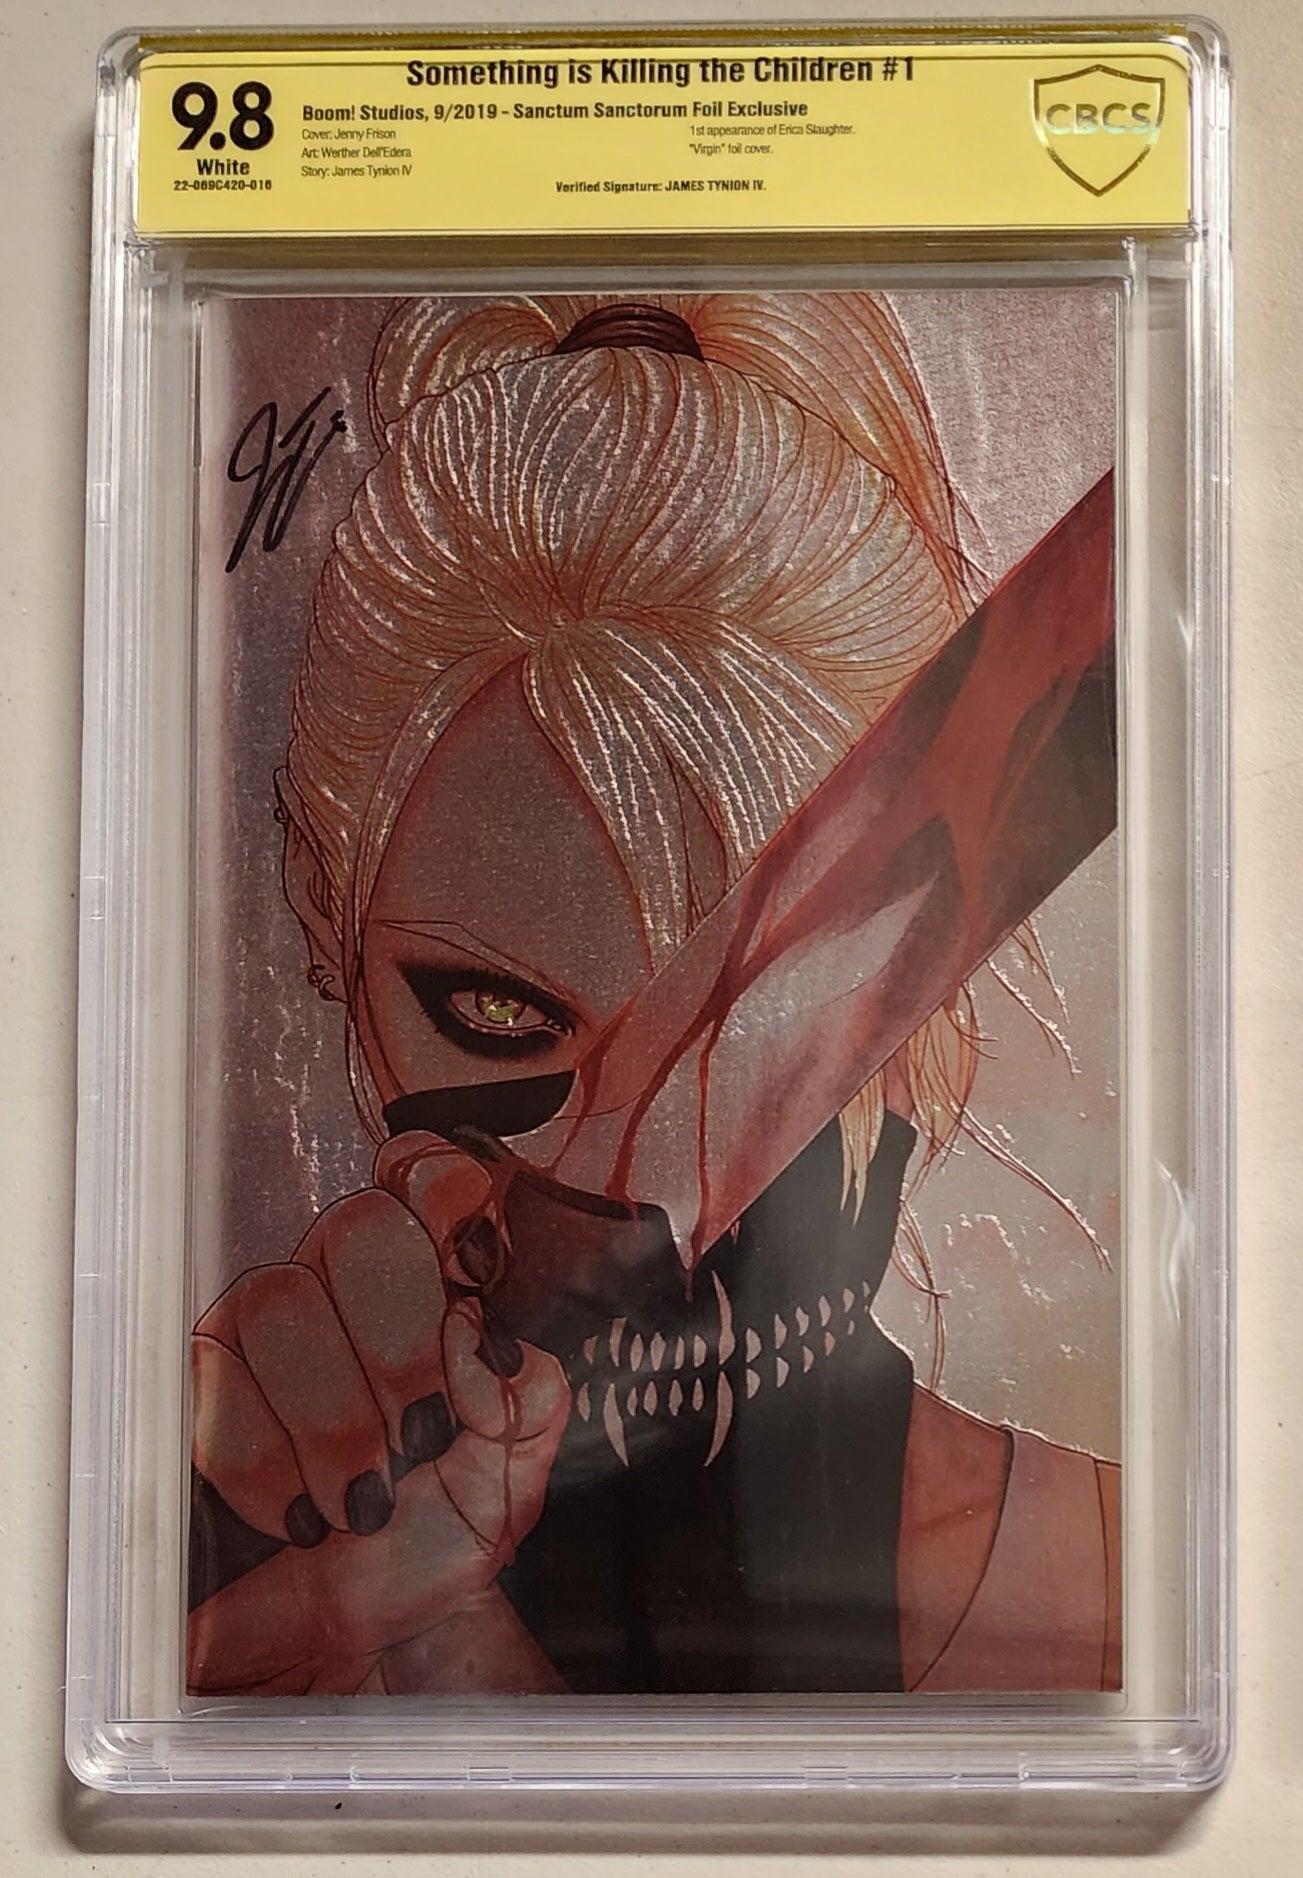 9.8 CBCS SOMETHING IS KILLING THE CHILDREN #1 FOIL FRISON VARIANT SIGNED BY JAMES TYNION IV [22-069C420-016]